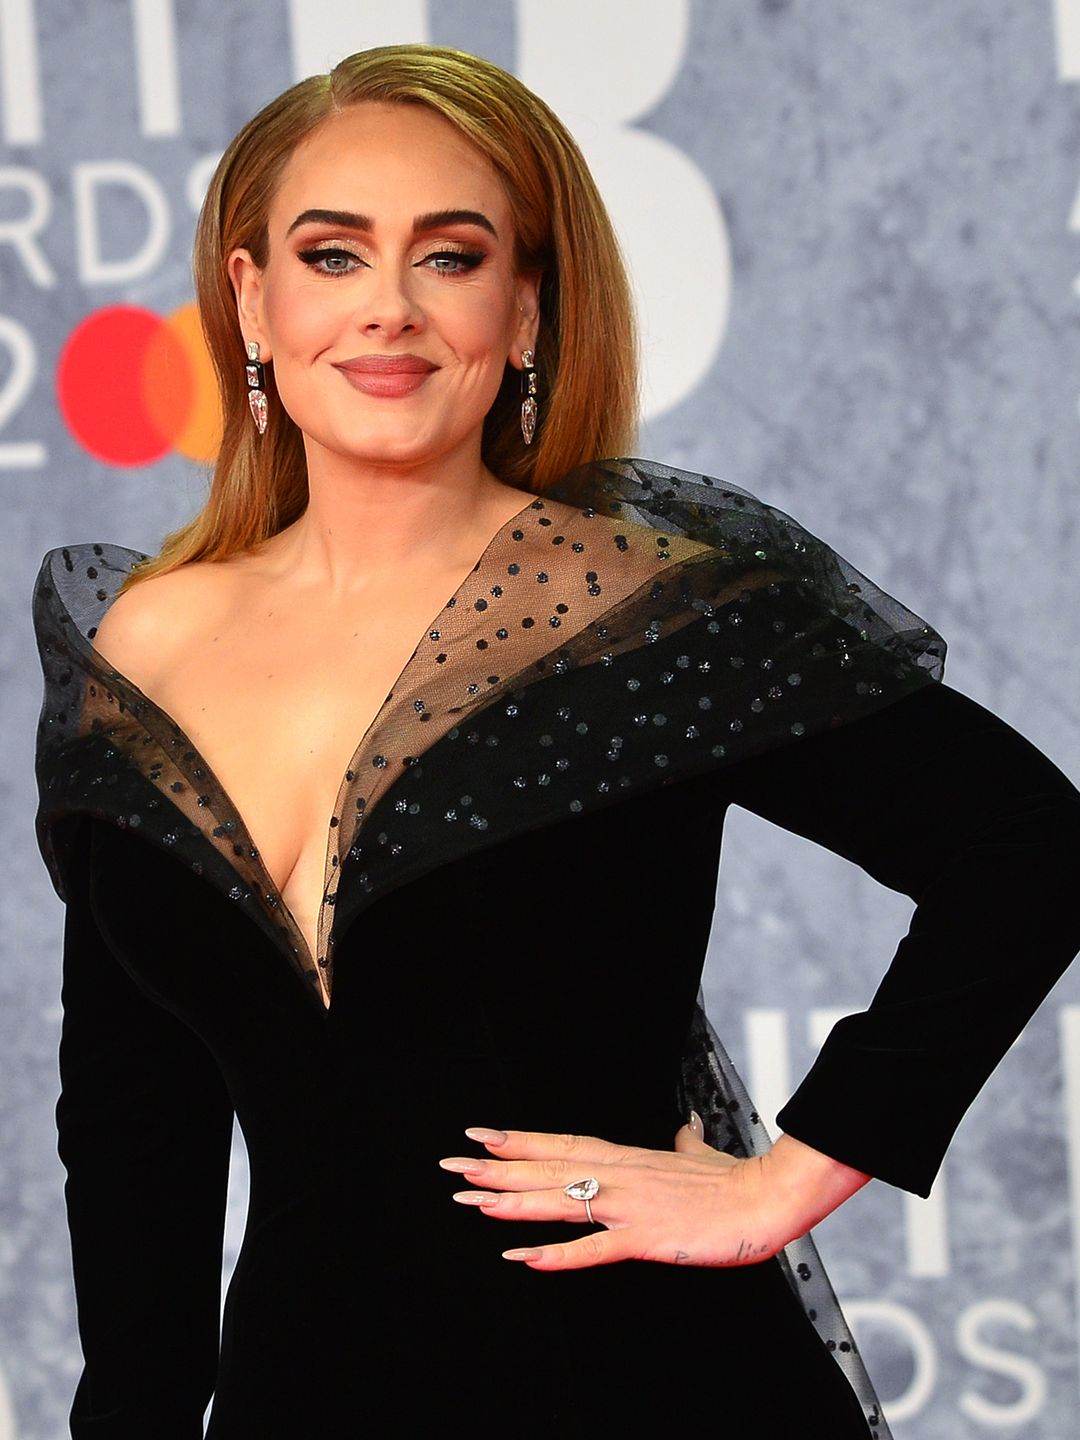 Adele gushes over romance with Rich Paul calling it the most  'openhearted' she's ever been in